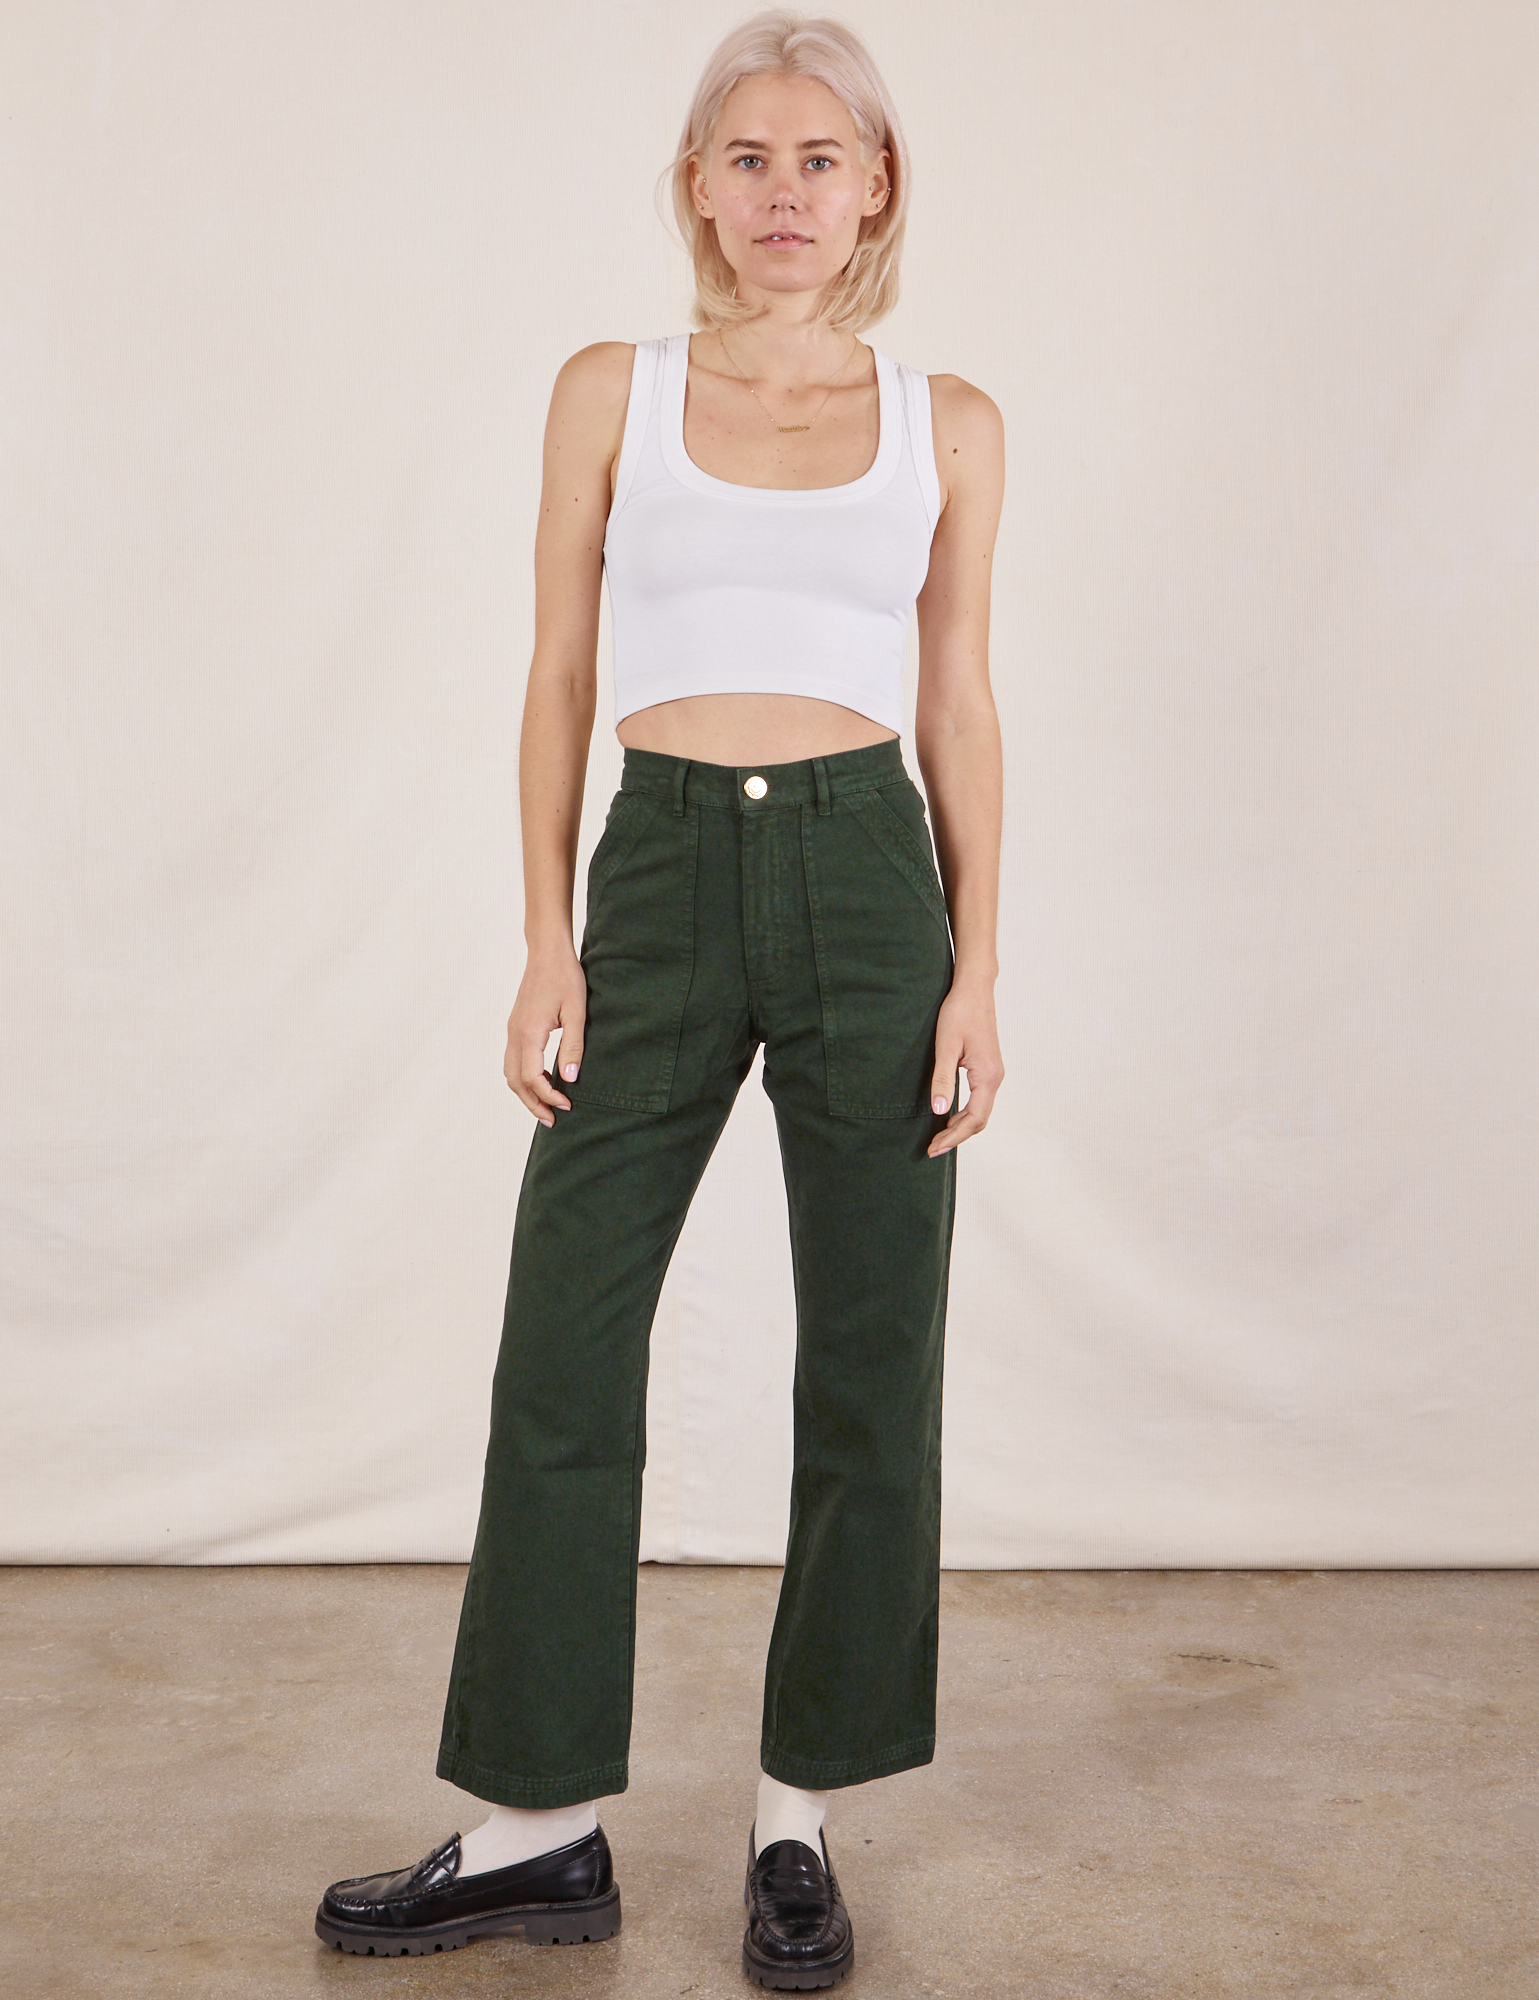 Madeline is 5&#39;9&quot; and wearing XXS Work Pants in Swamp Green paired with Cropped Tank Top in vintage tee off-white